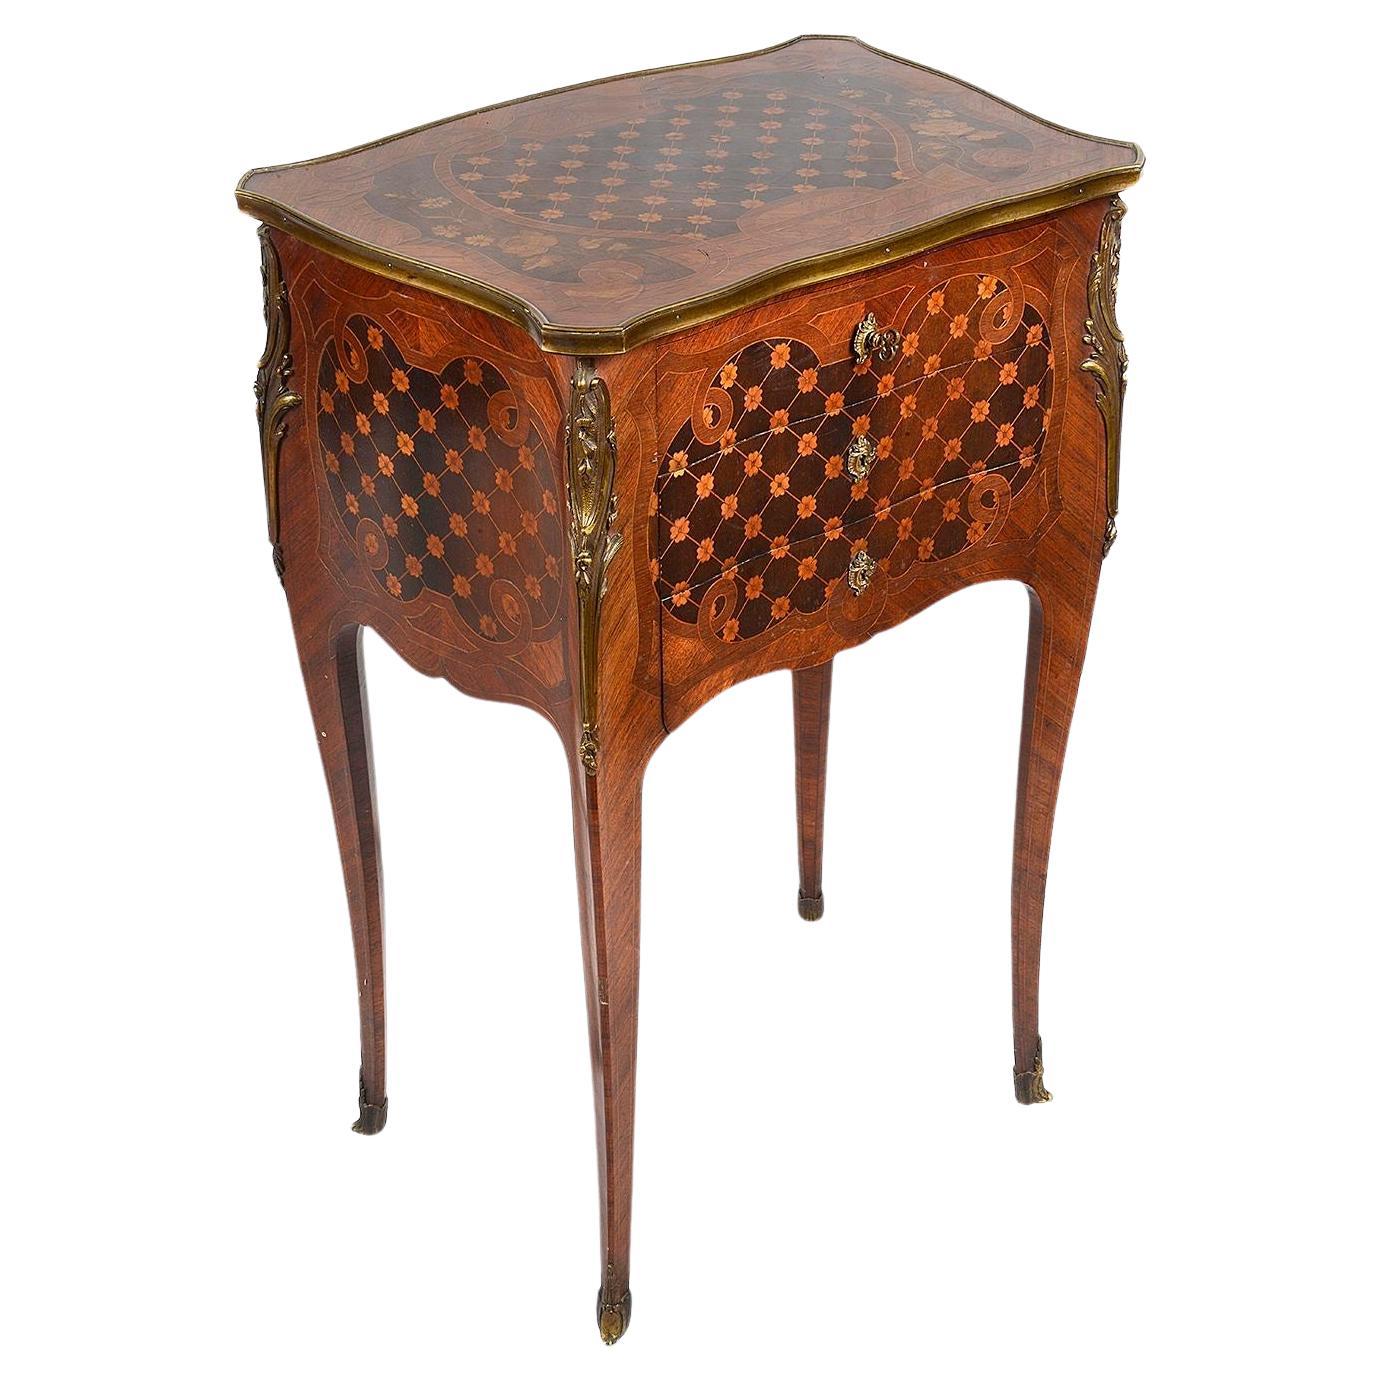 Paul Somani marquetry side table, circa 1890